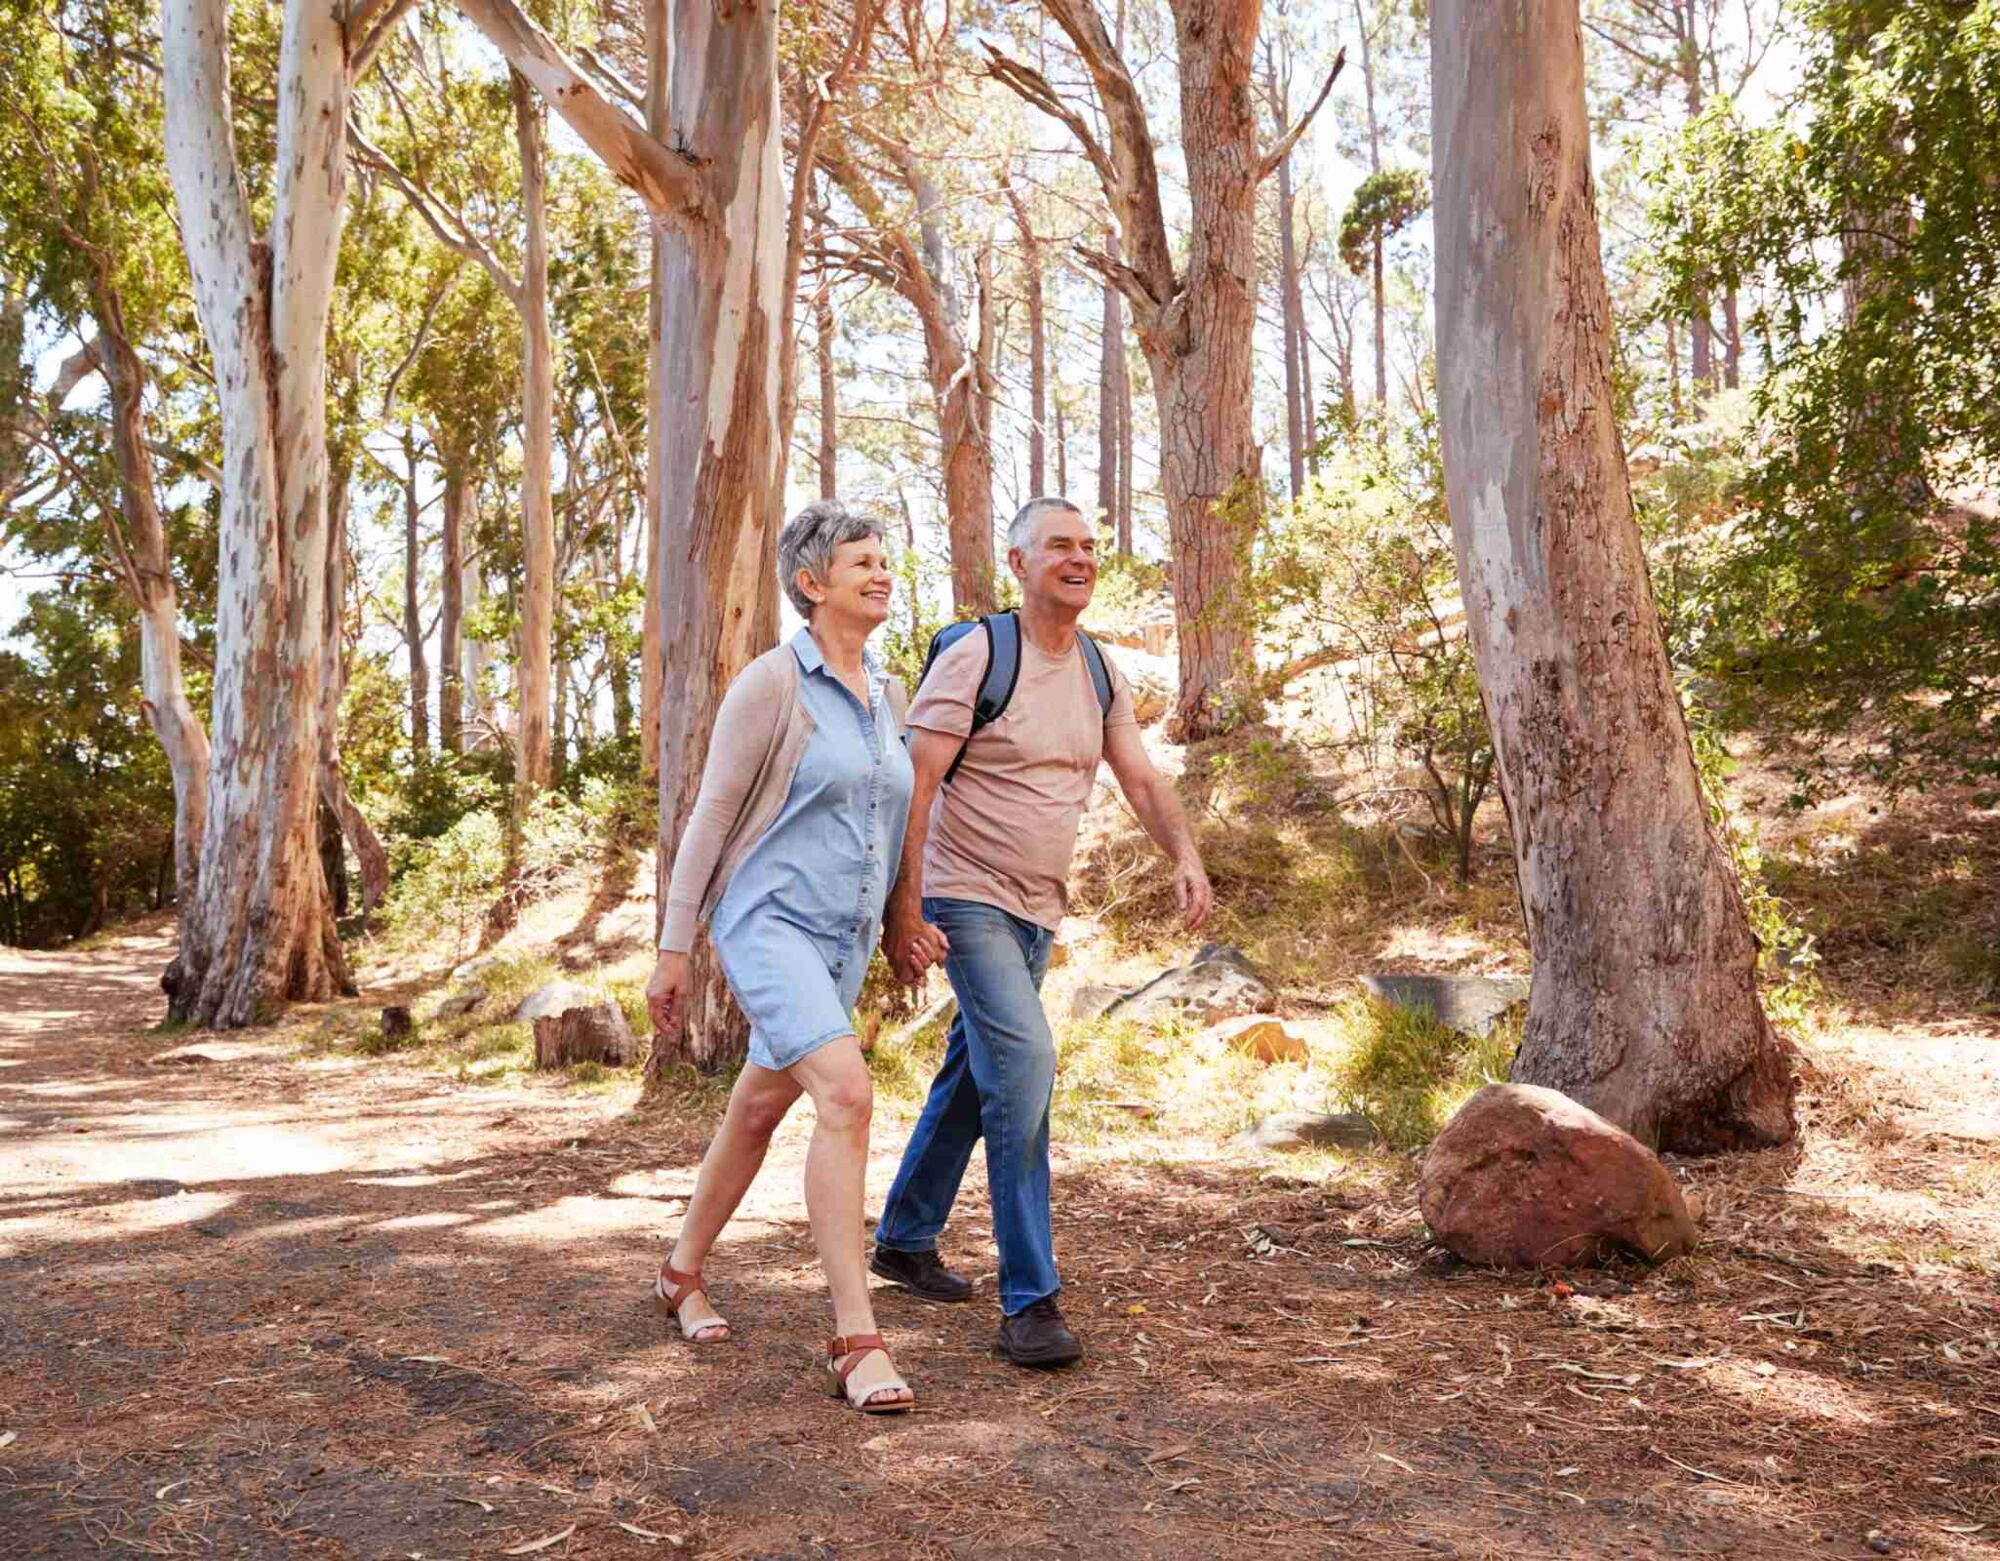 An older couple walk along a trail in the forest.